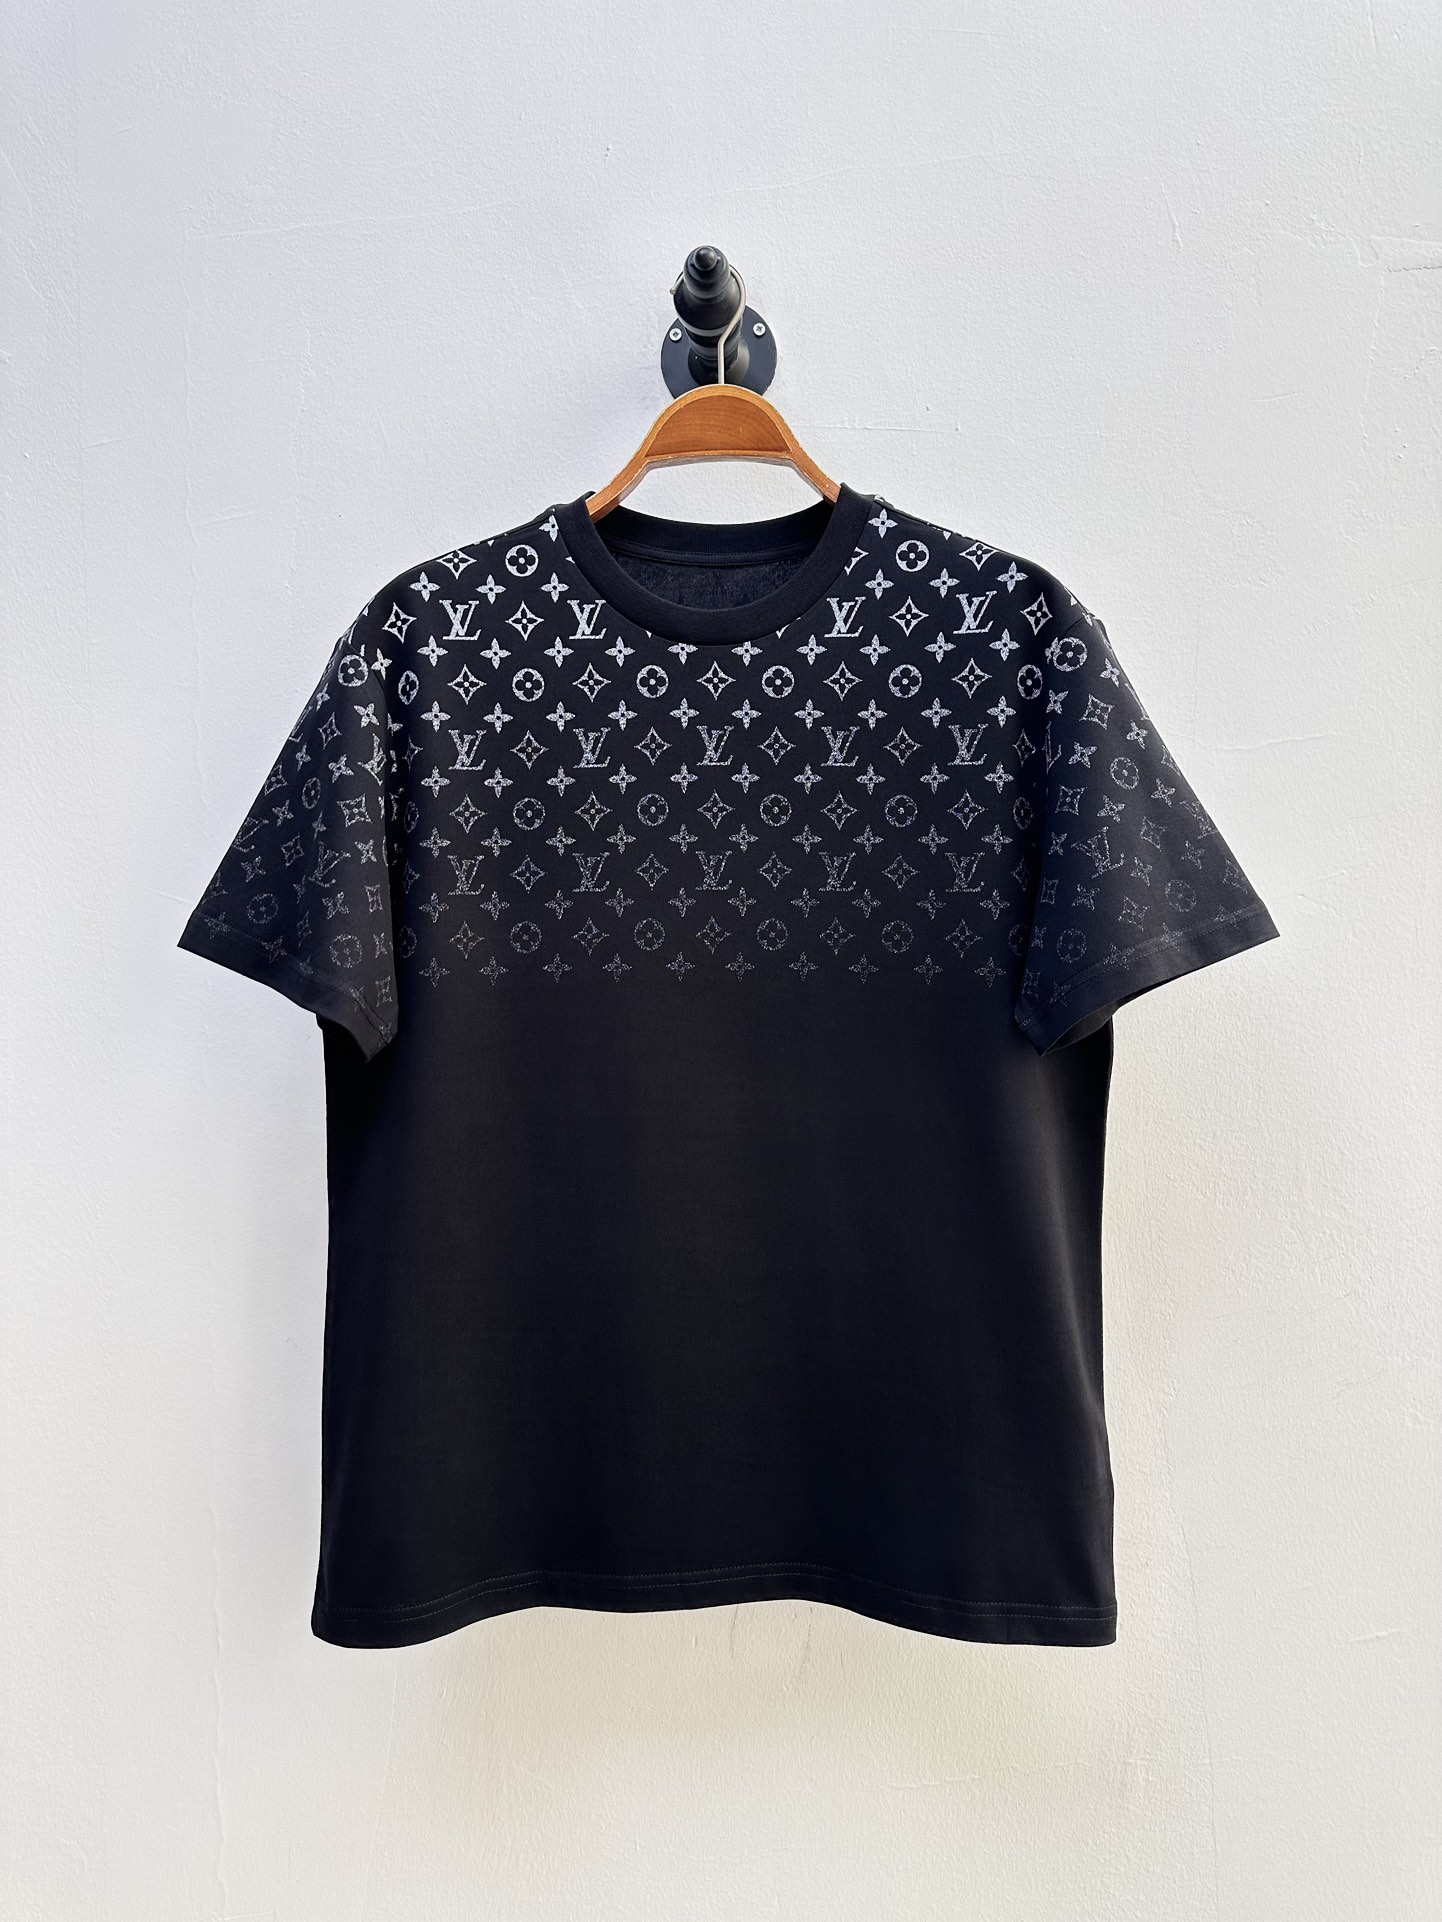 Louis Vuitton Store
 Clothing T-Shirt sell Online
 Printing Cotton Knitting Casual